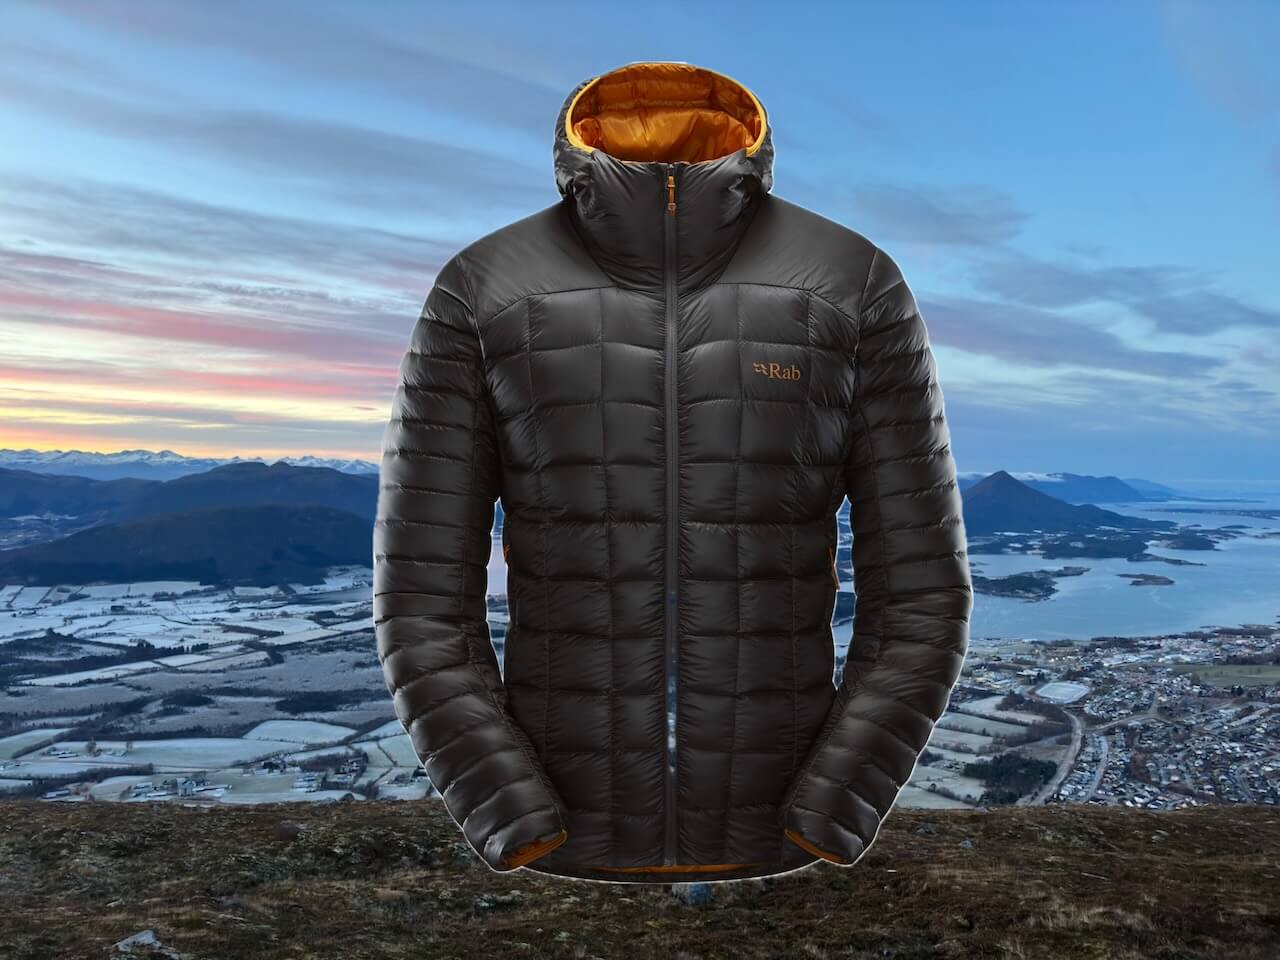 Featured image for “Test: Rab Mythic Alpine Light Jacket”